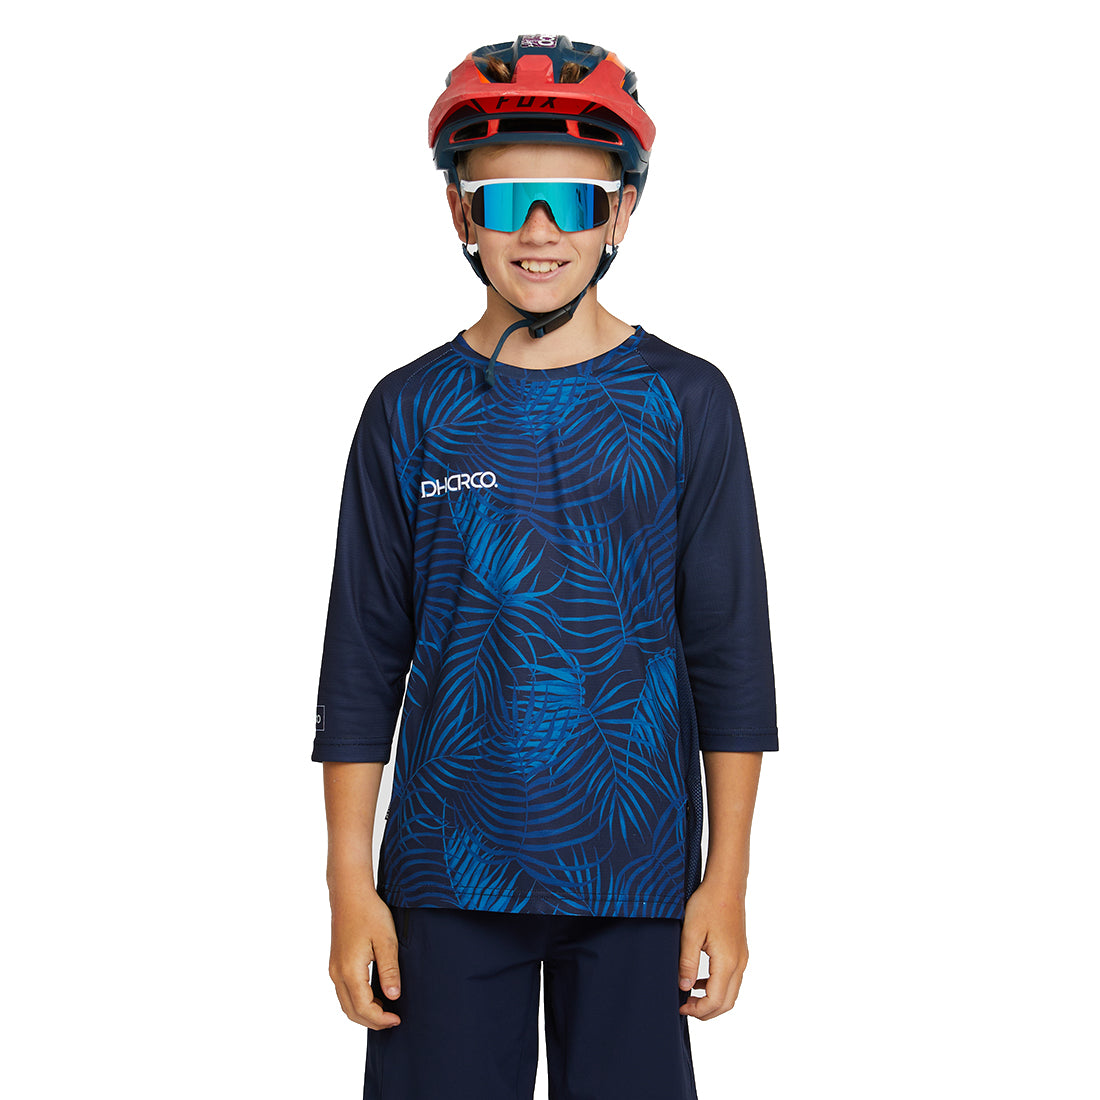 DHaRCO Youth 3-4 Sleeve Jersey - Youth S - Forbidden Blue